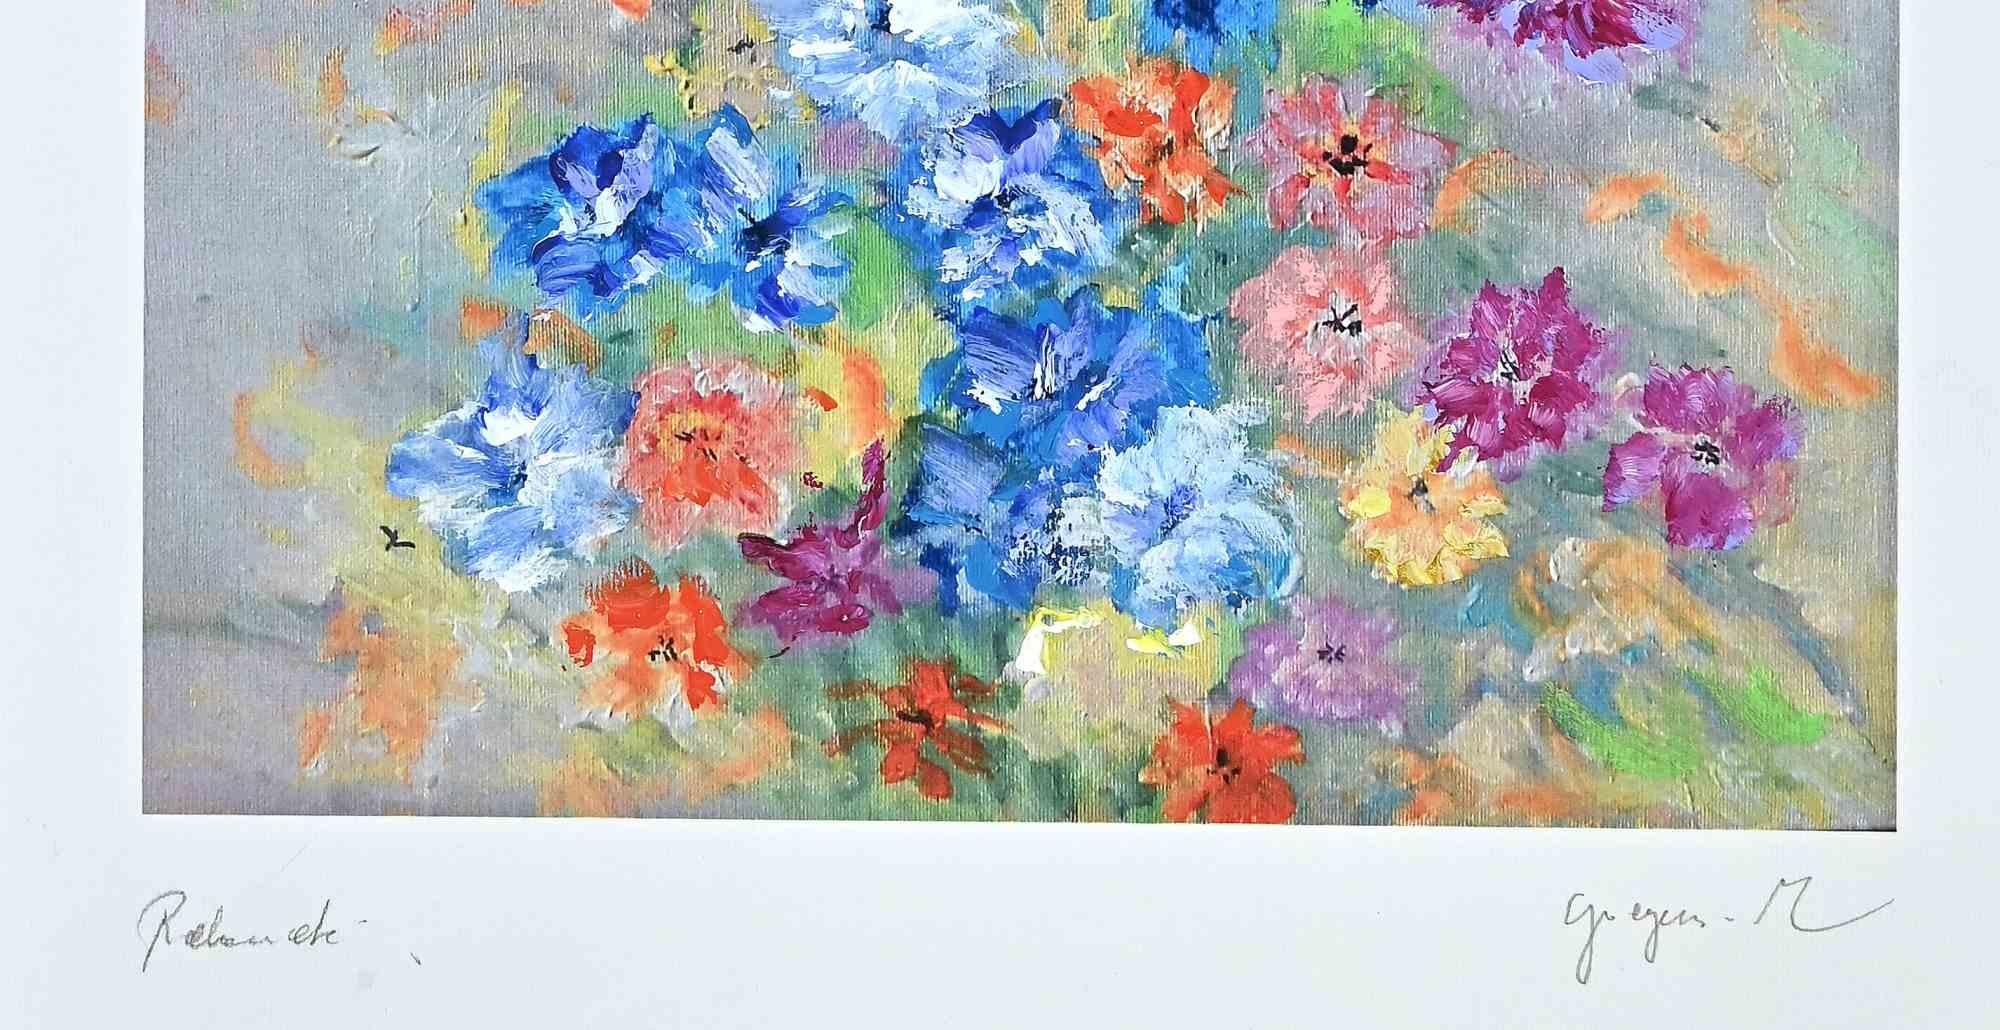 Flowers is a very colorful artwork realized by Martine Goyens in the late 20th Century.

Digigraph print.

Hand-signed.

Good conditions.

The artwork id depicted through confident strokes in a well-balanced composition.